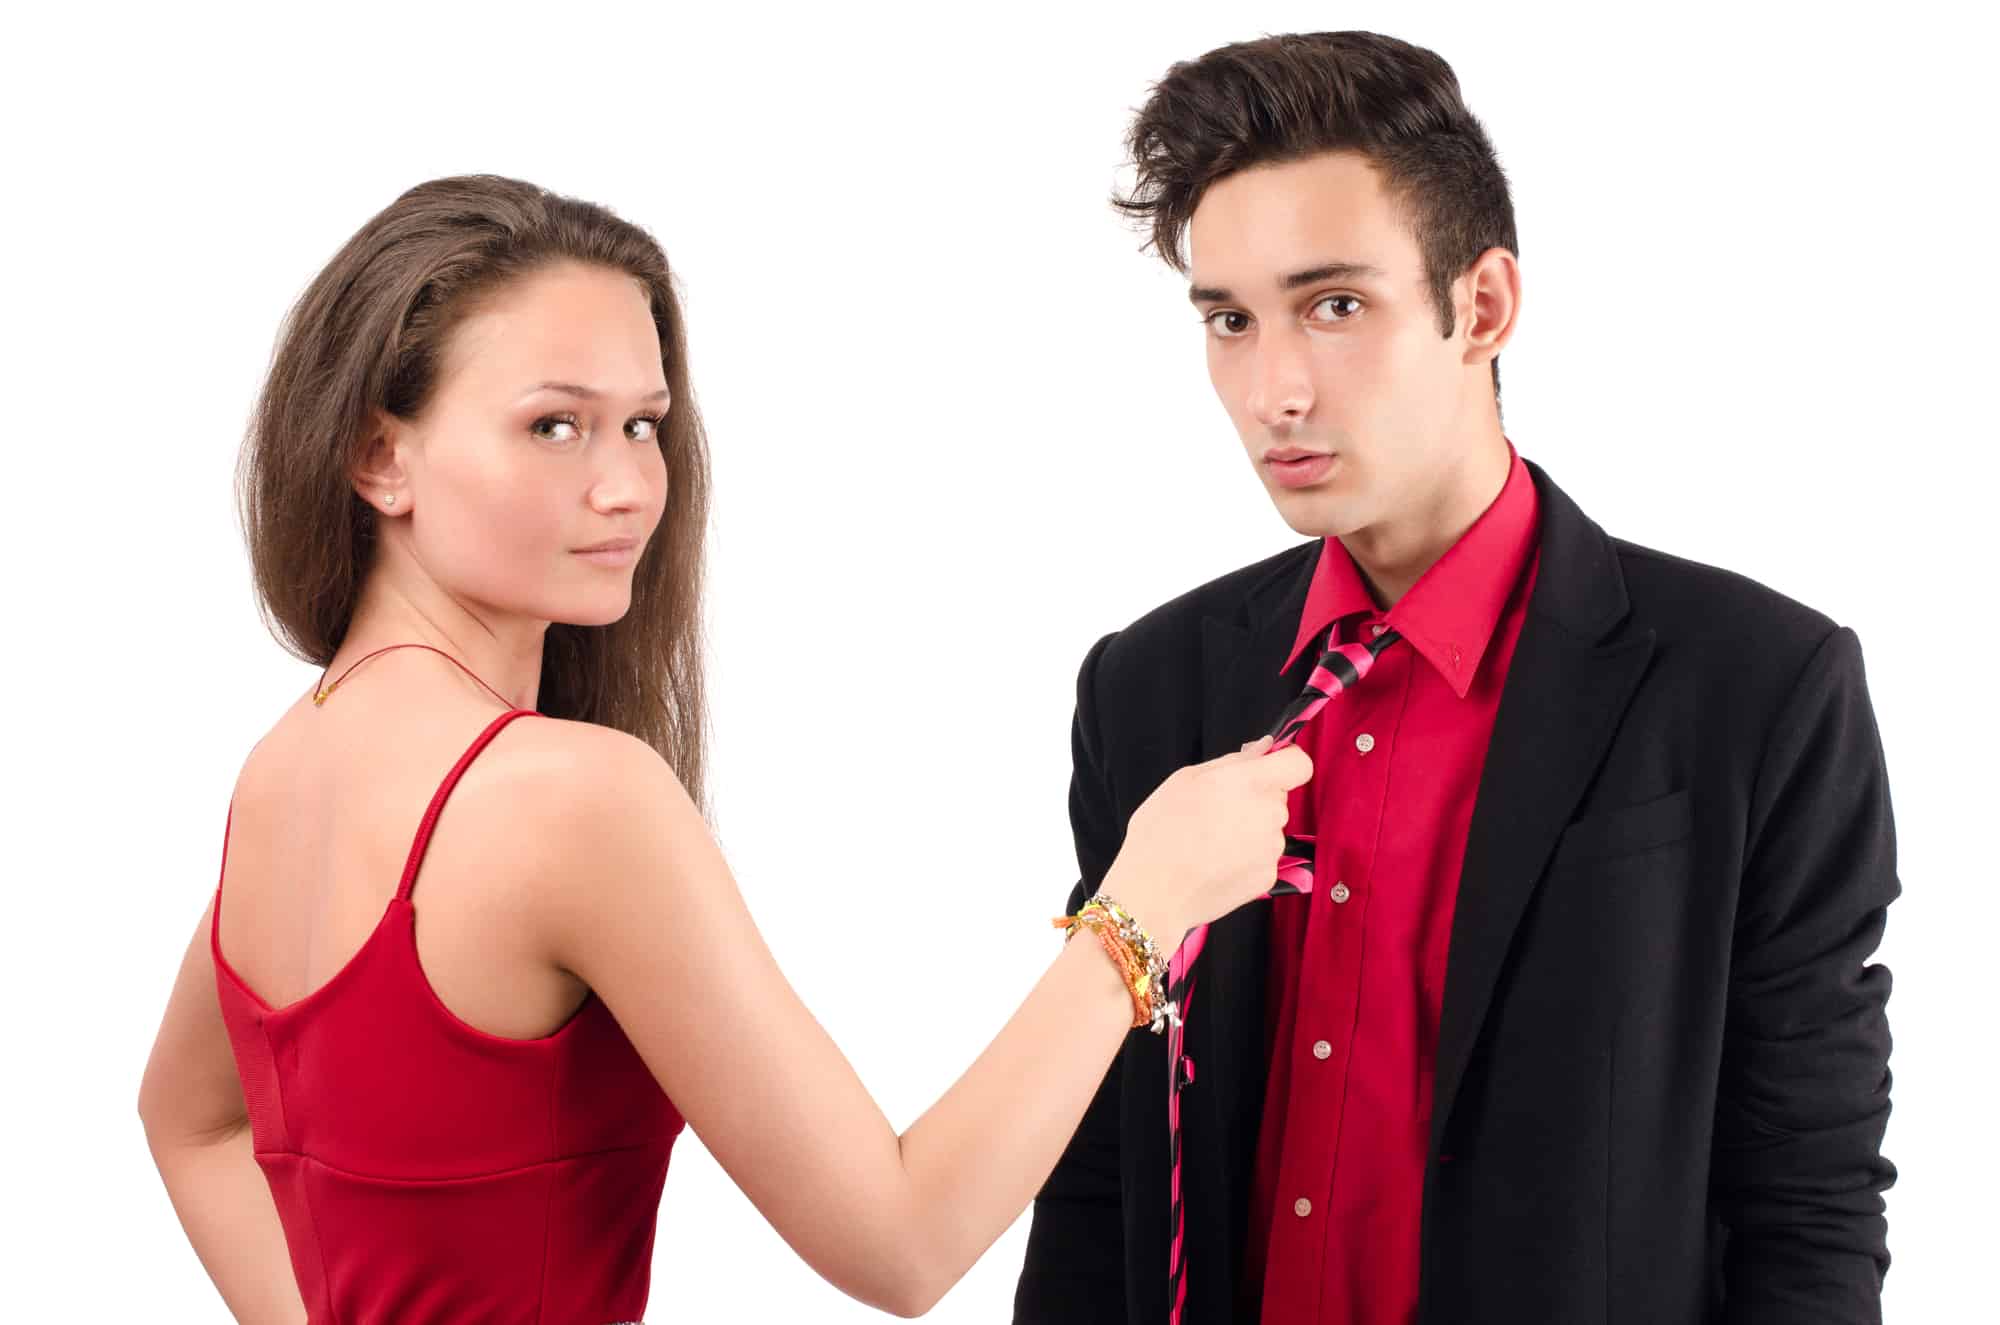 What causes possessiveness in a relationship